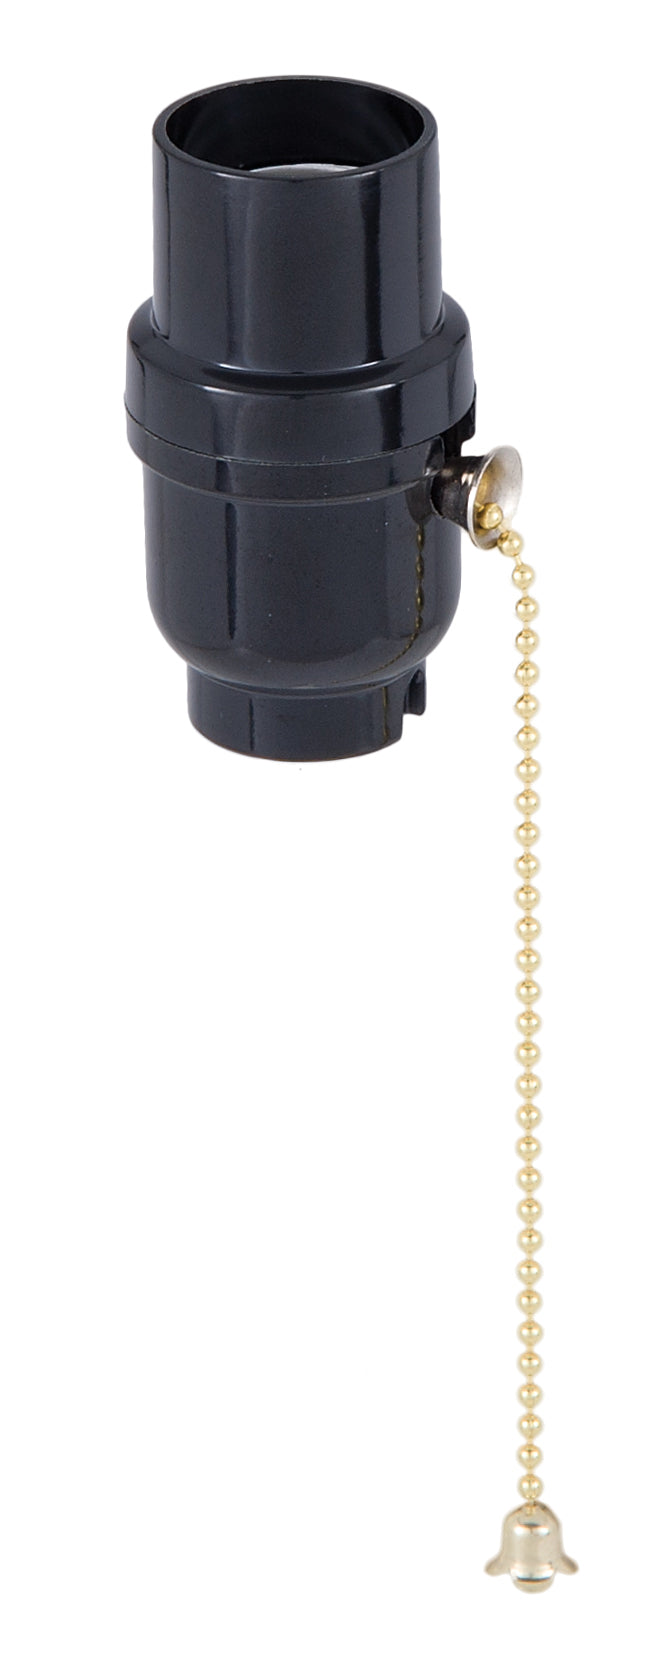 Plastic Pull Chain Socket With Brass Chain and Plain Top